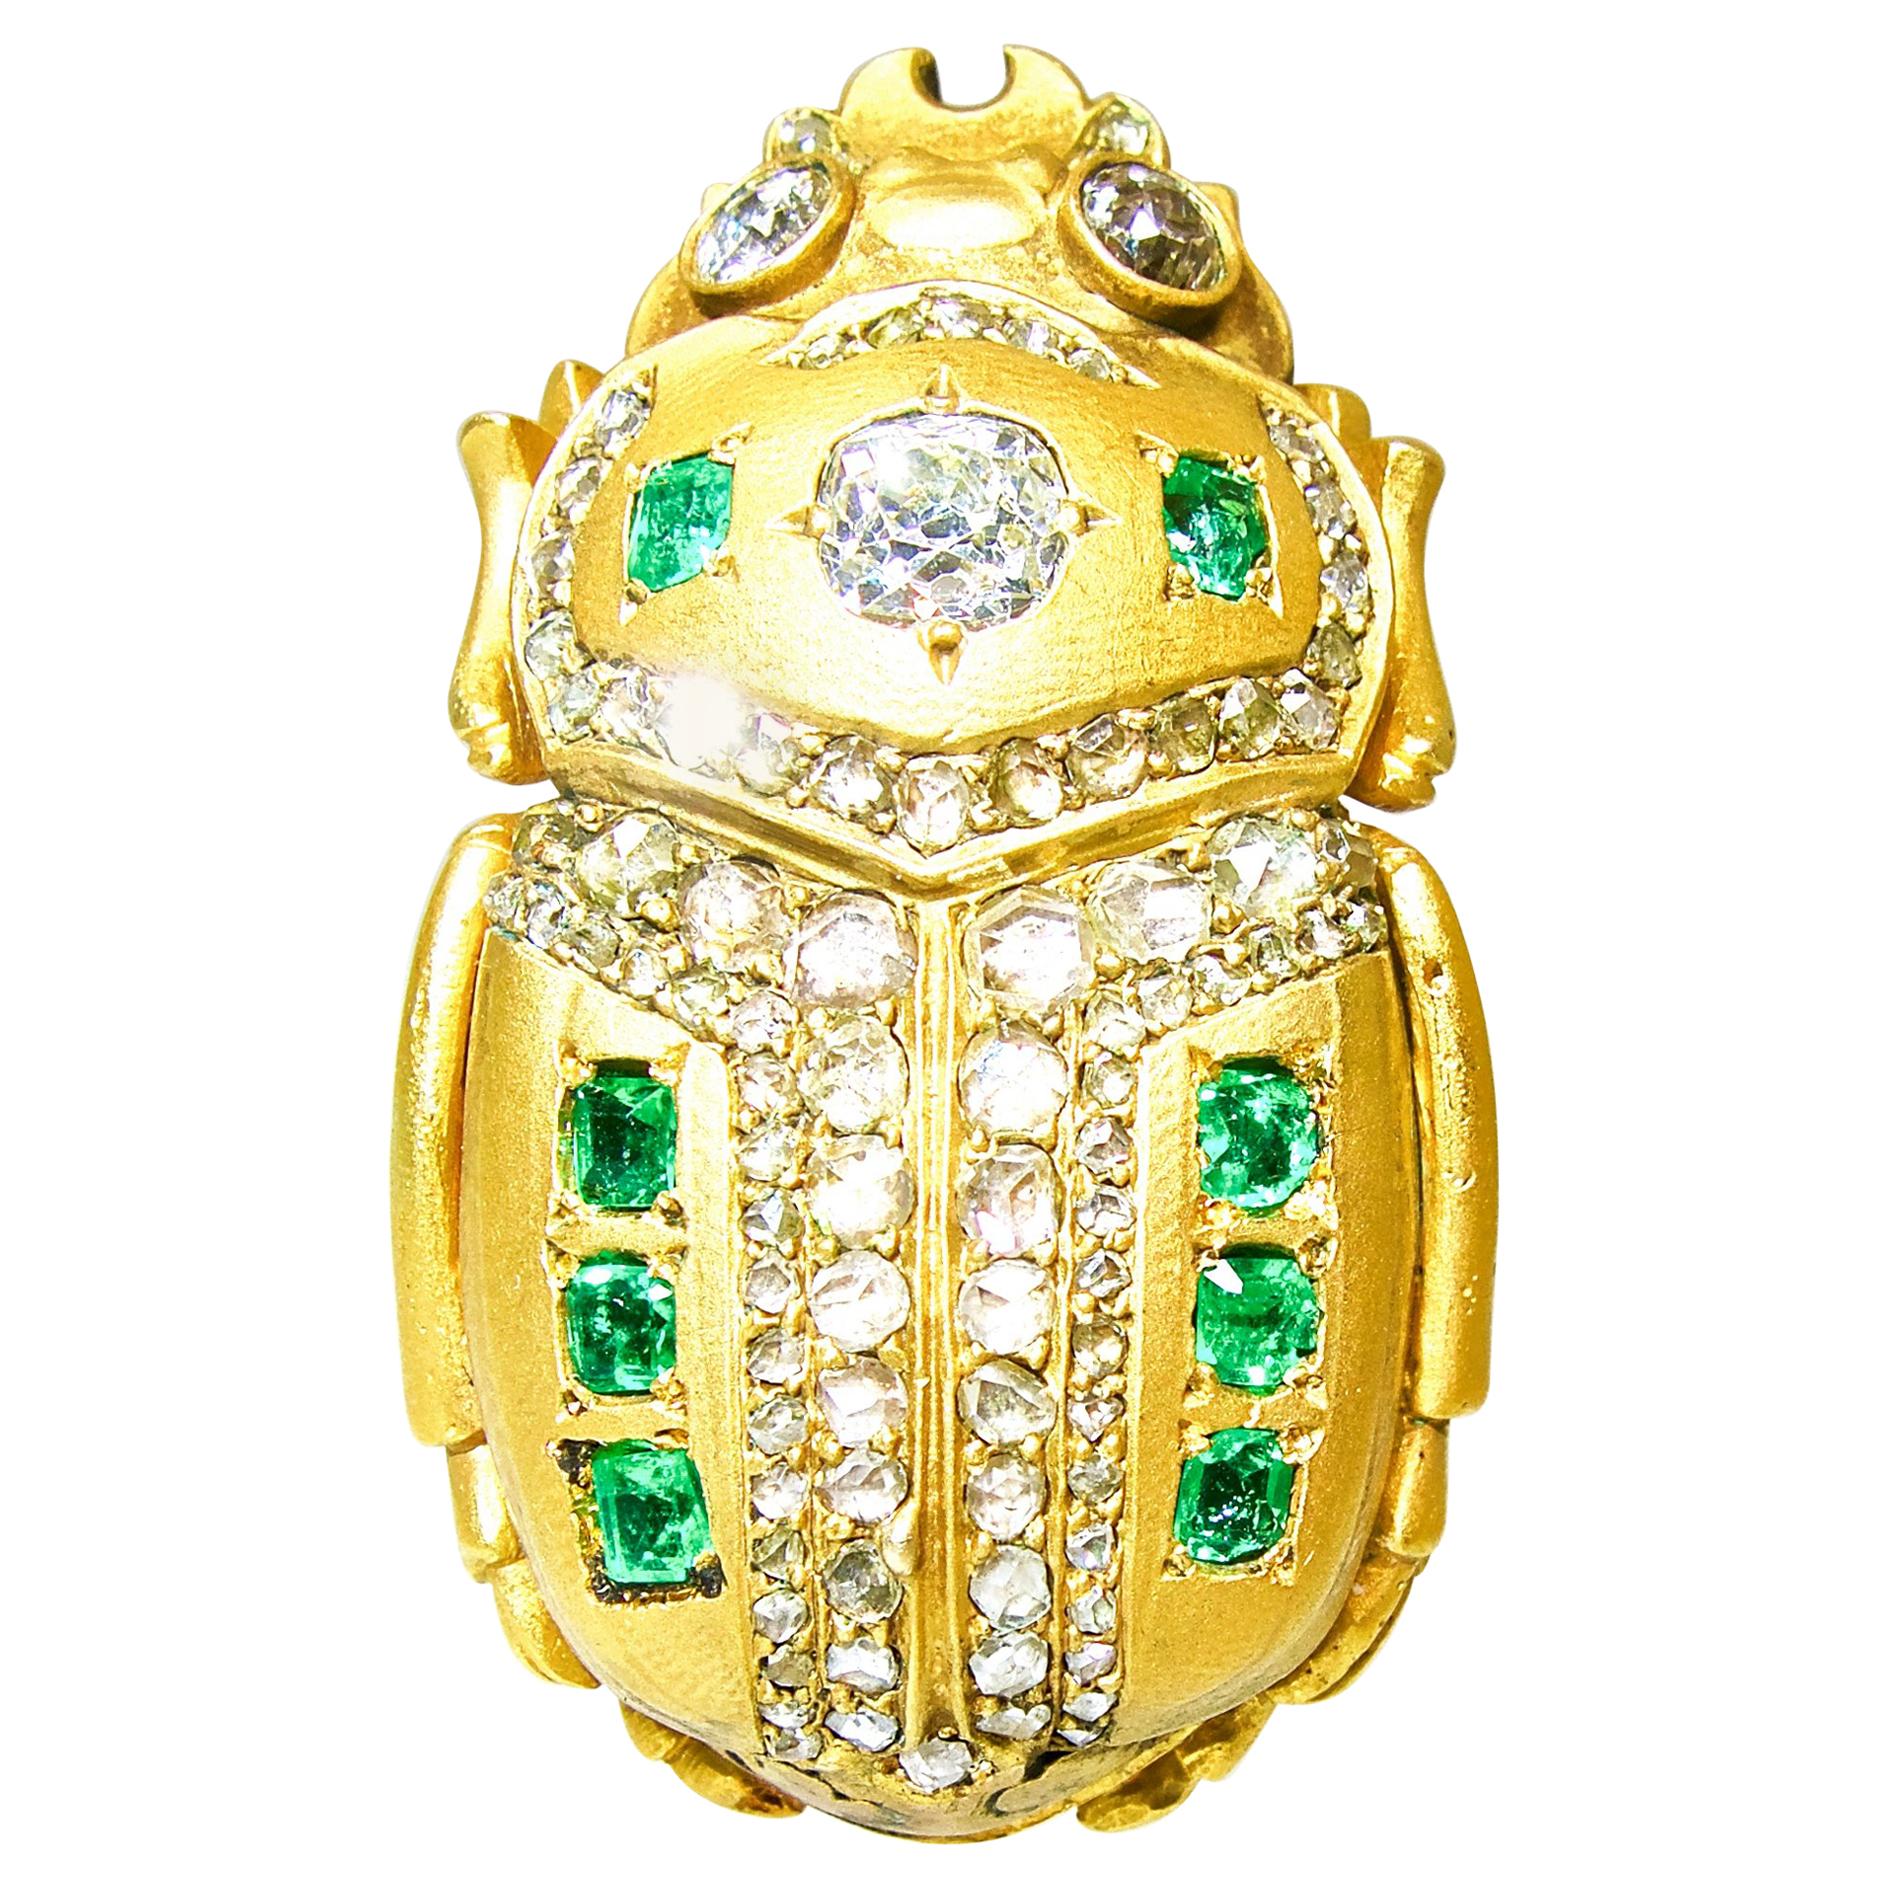 Antique, mid 19th century, this 18K well made scarab is one of the finest of this type we have seen.  He is large, well modeled - in three dimensions - heavy and substantial.  His back is studded with old cut diamonds both Mine cut and rose cut and